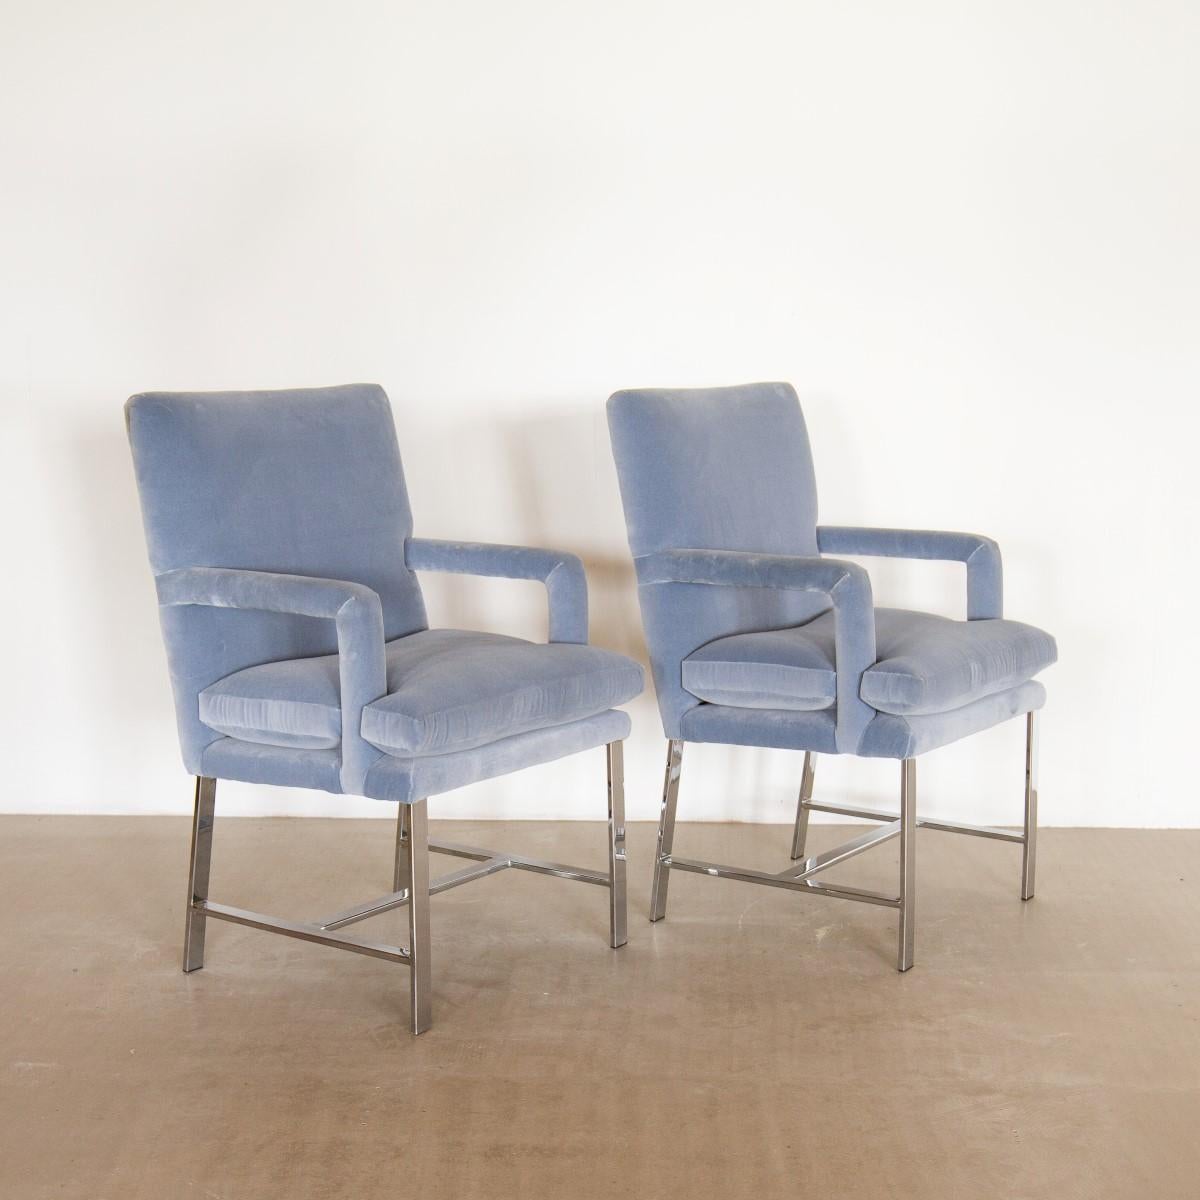 Pair of chromium steel framed velvet upholstered carver armchairs late 1970s reupholstered by Talisman here in our UK workshops
Generously proportioned armchairs that could be perfect as guest chairs for a large desk or tidy sized armchairs in a